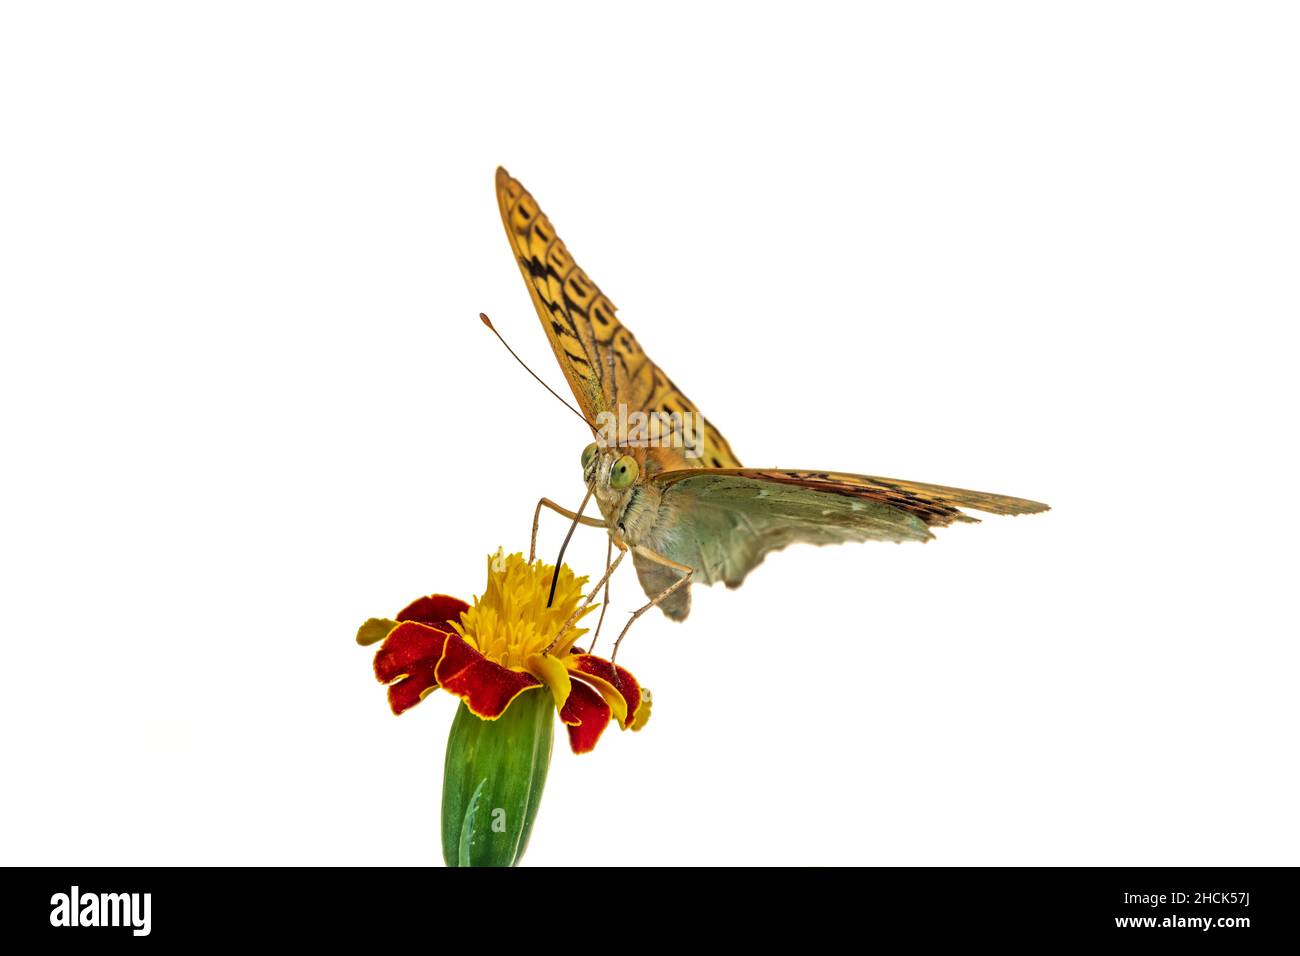 The dark green fritillary butterfly collects nectar on flower, isolated on white background. Speyeria aglaja, previously known as Argynnis aglaja is a Stock Photo